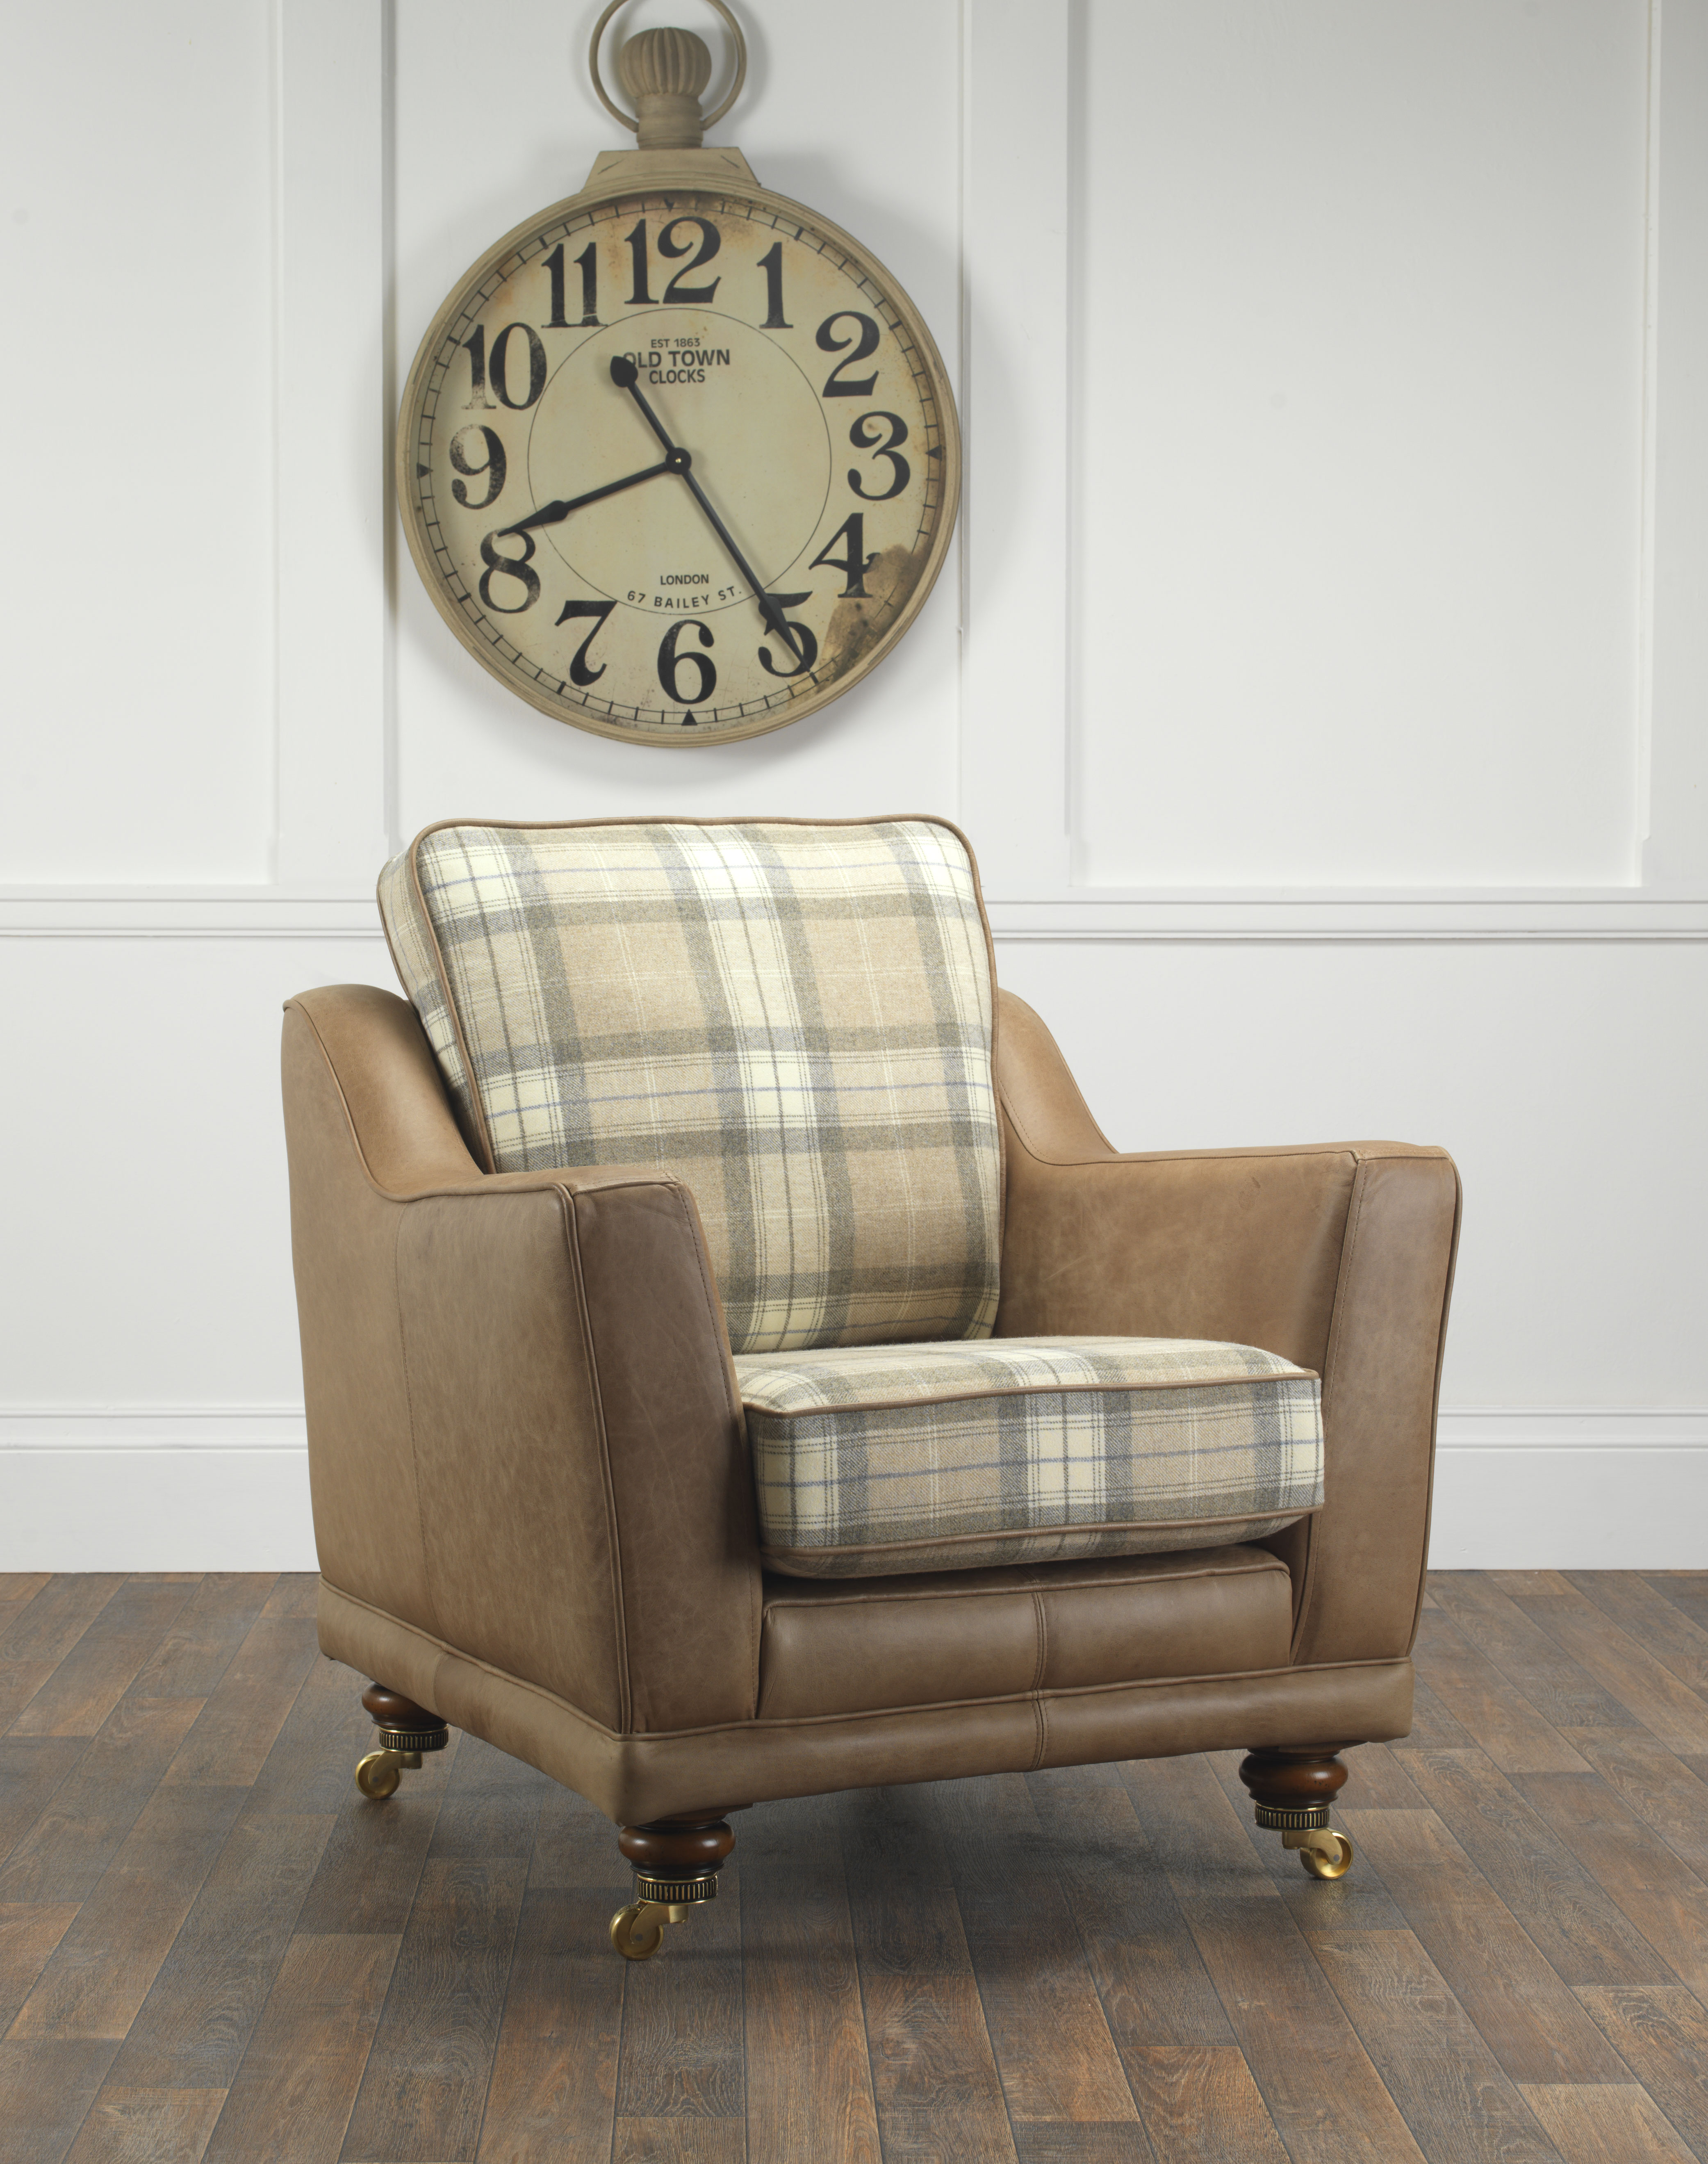 Made to order Tilly Chair with Clock